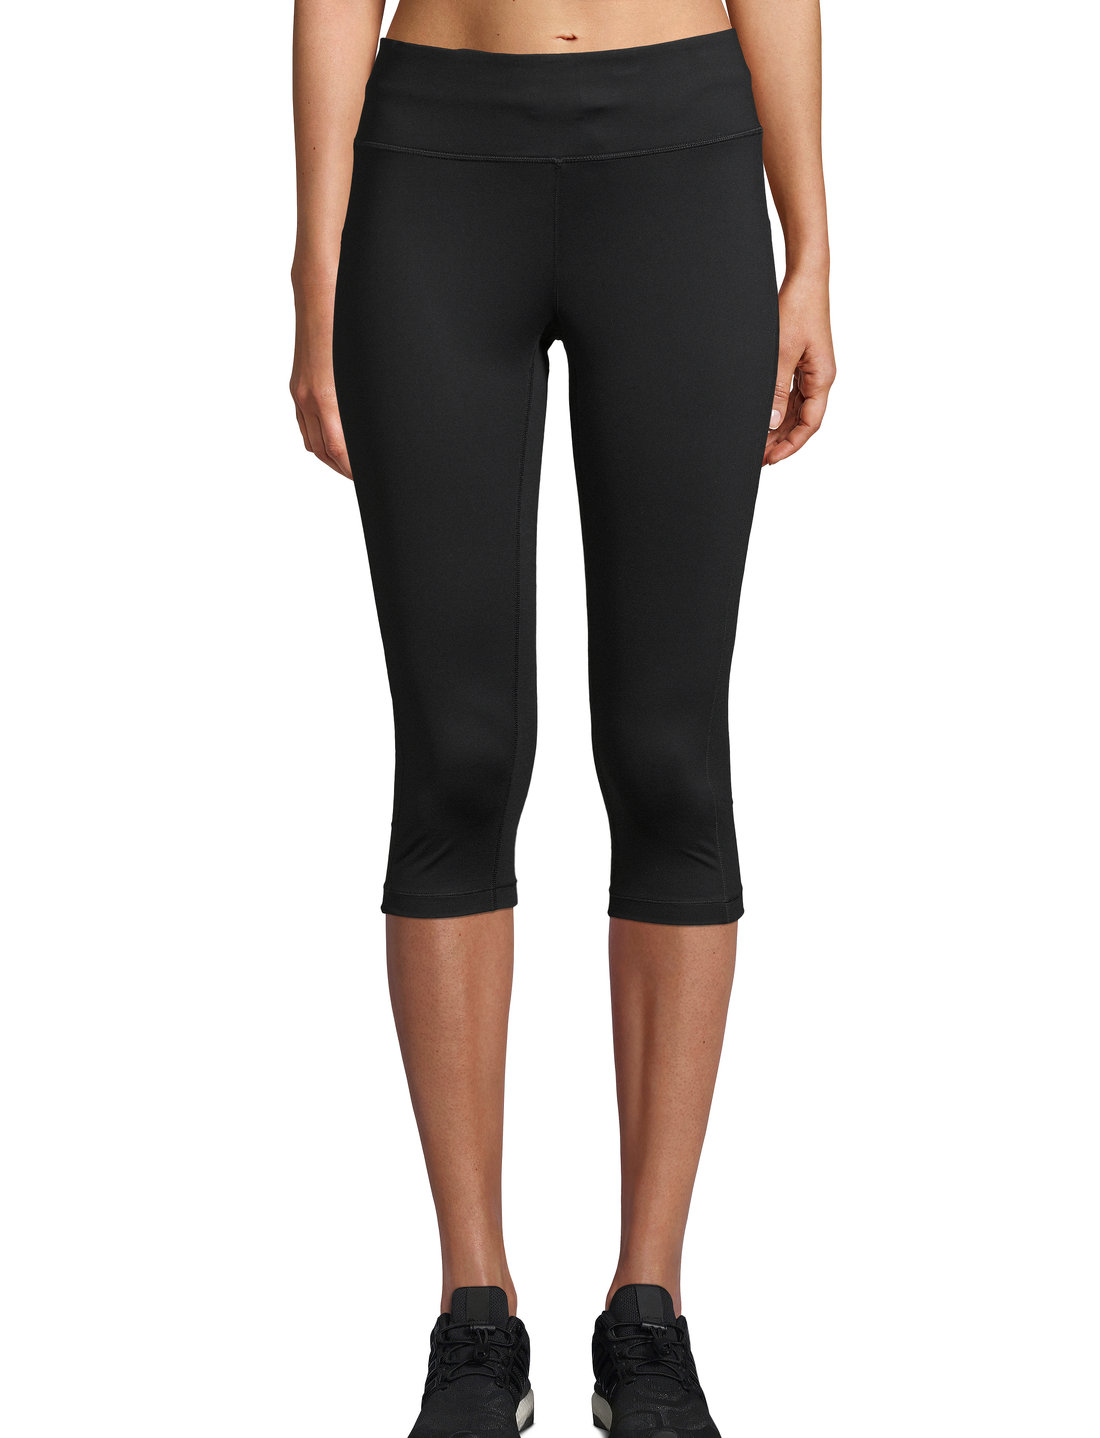 Casall Essential 3/4 Tights - Leggings & Tights